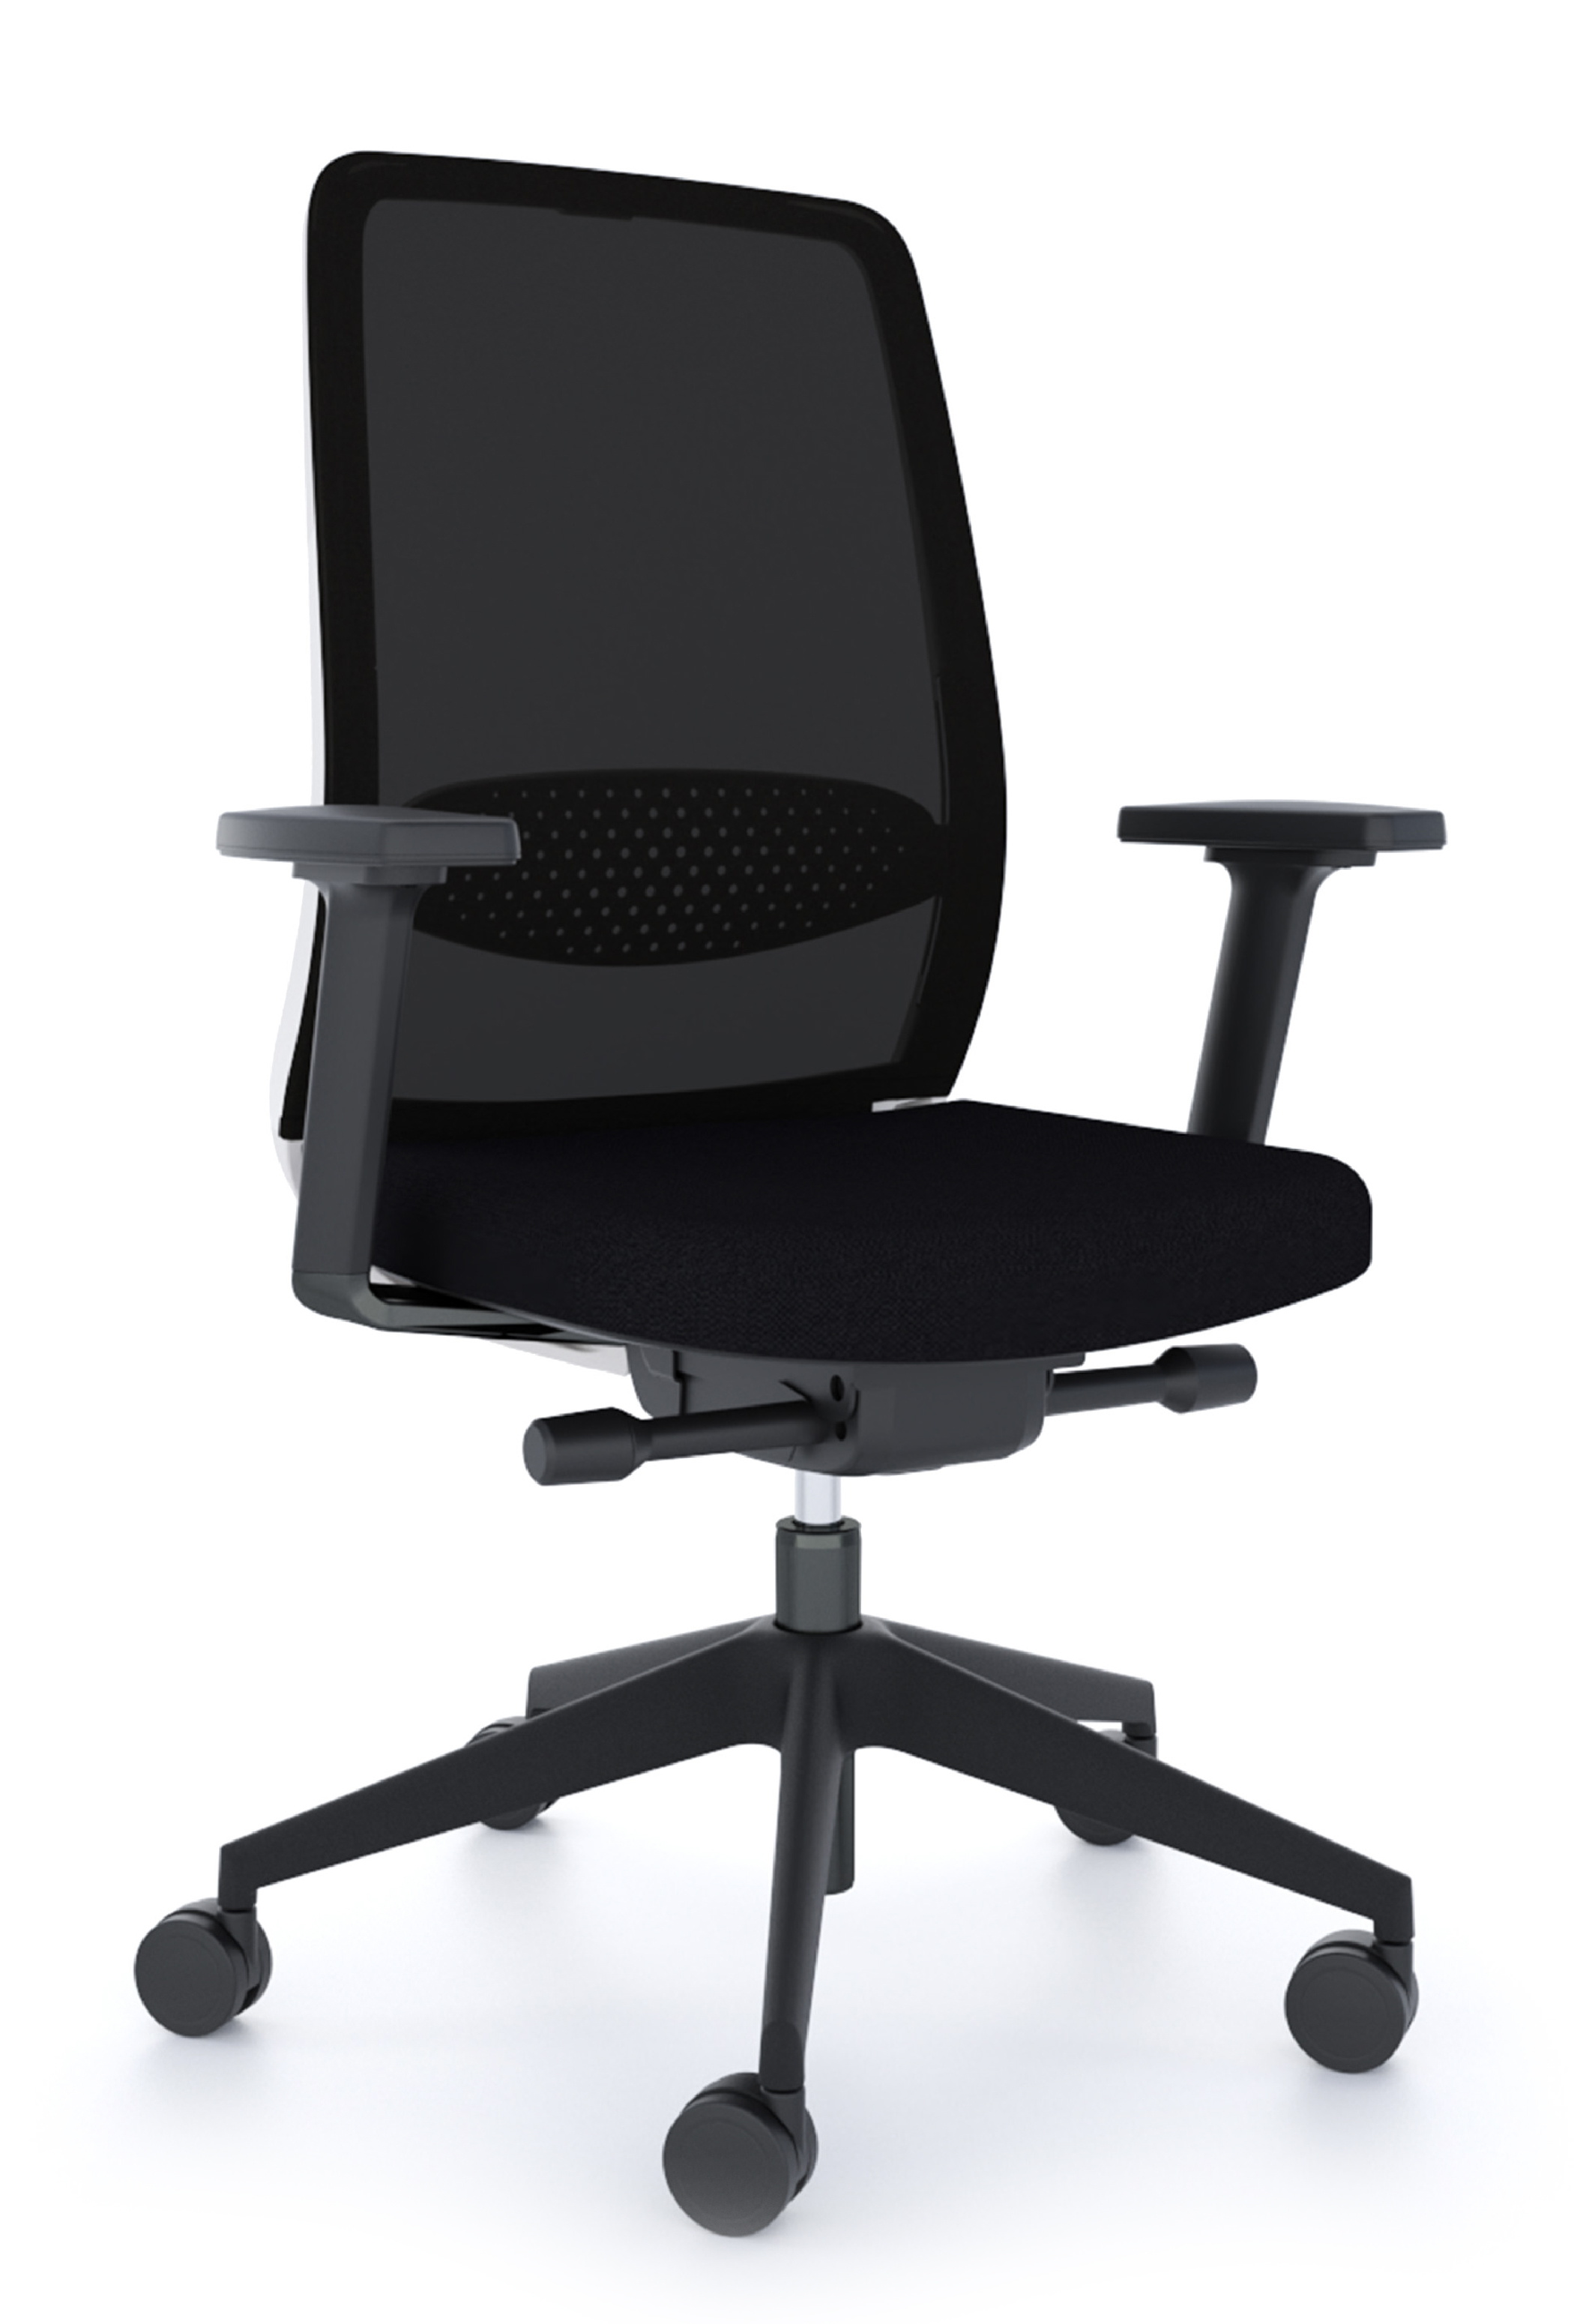 WS - N12 task chair - White&Black (Front angle)